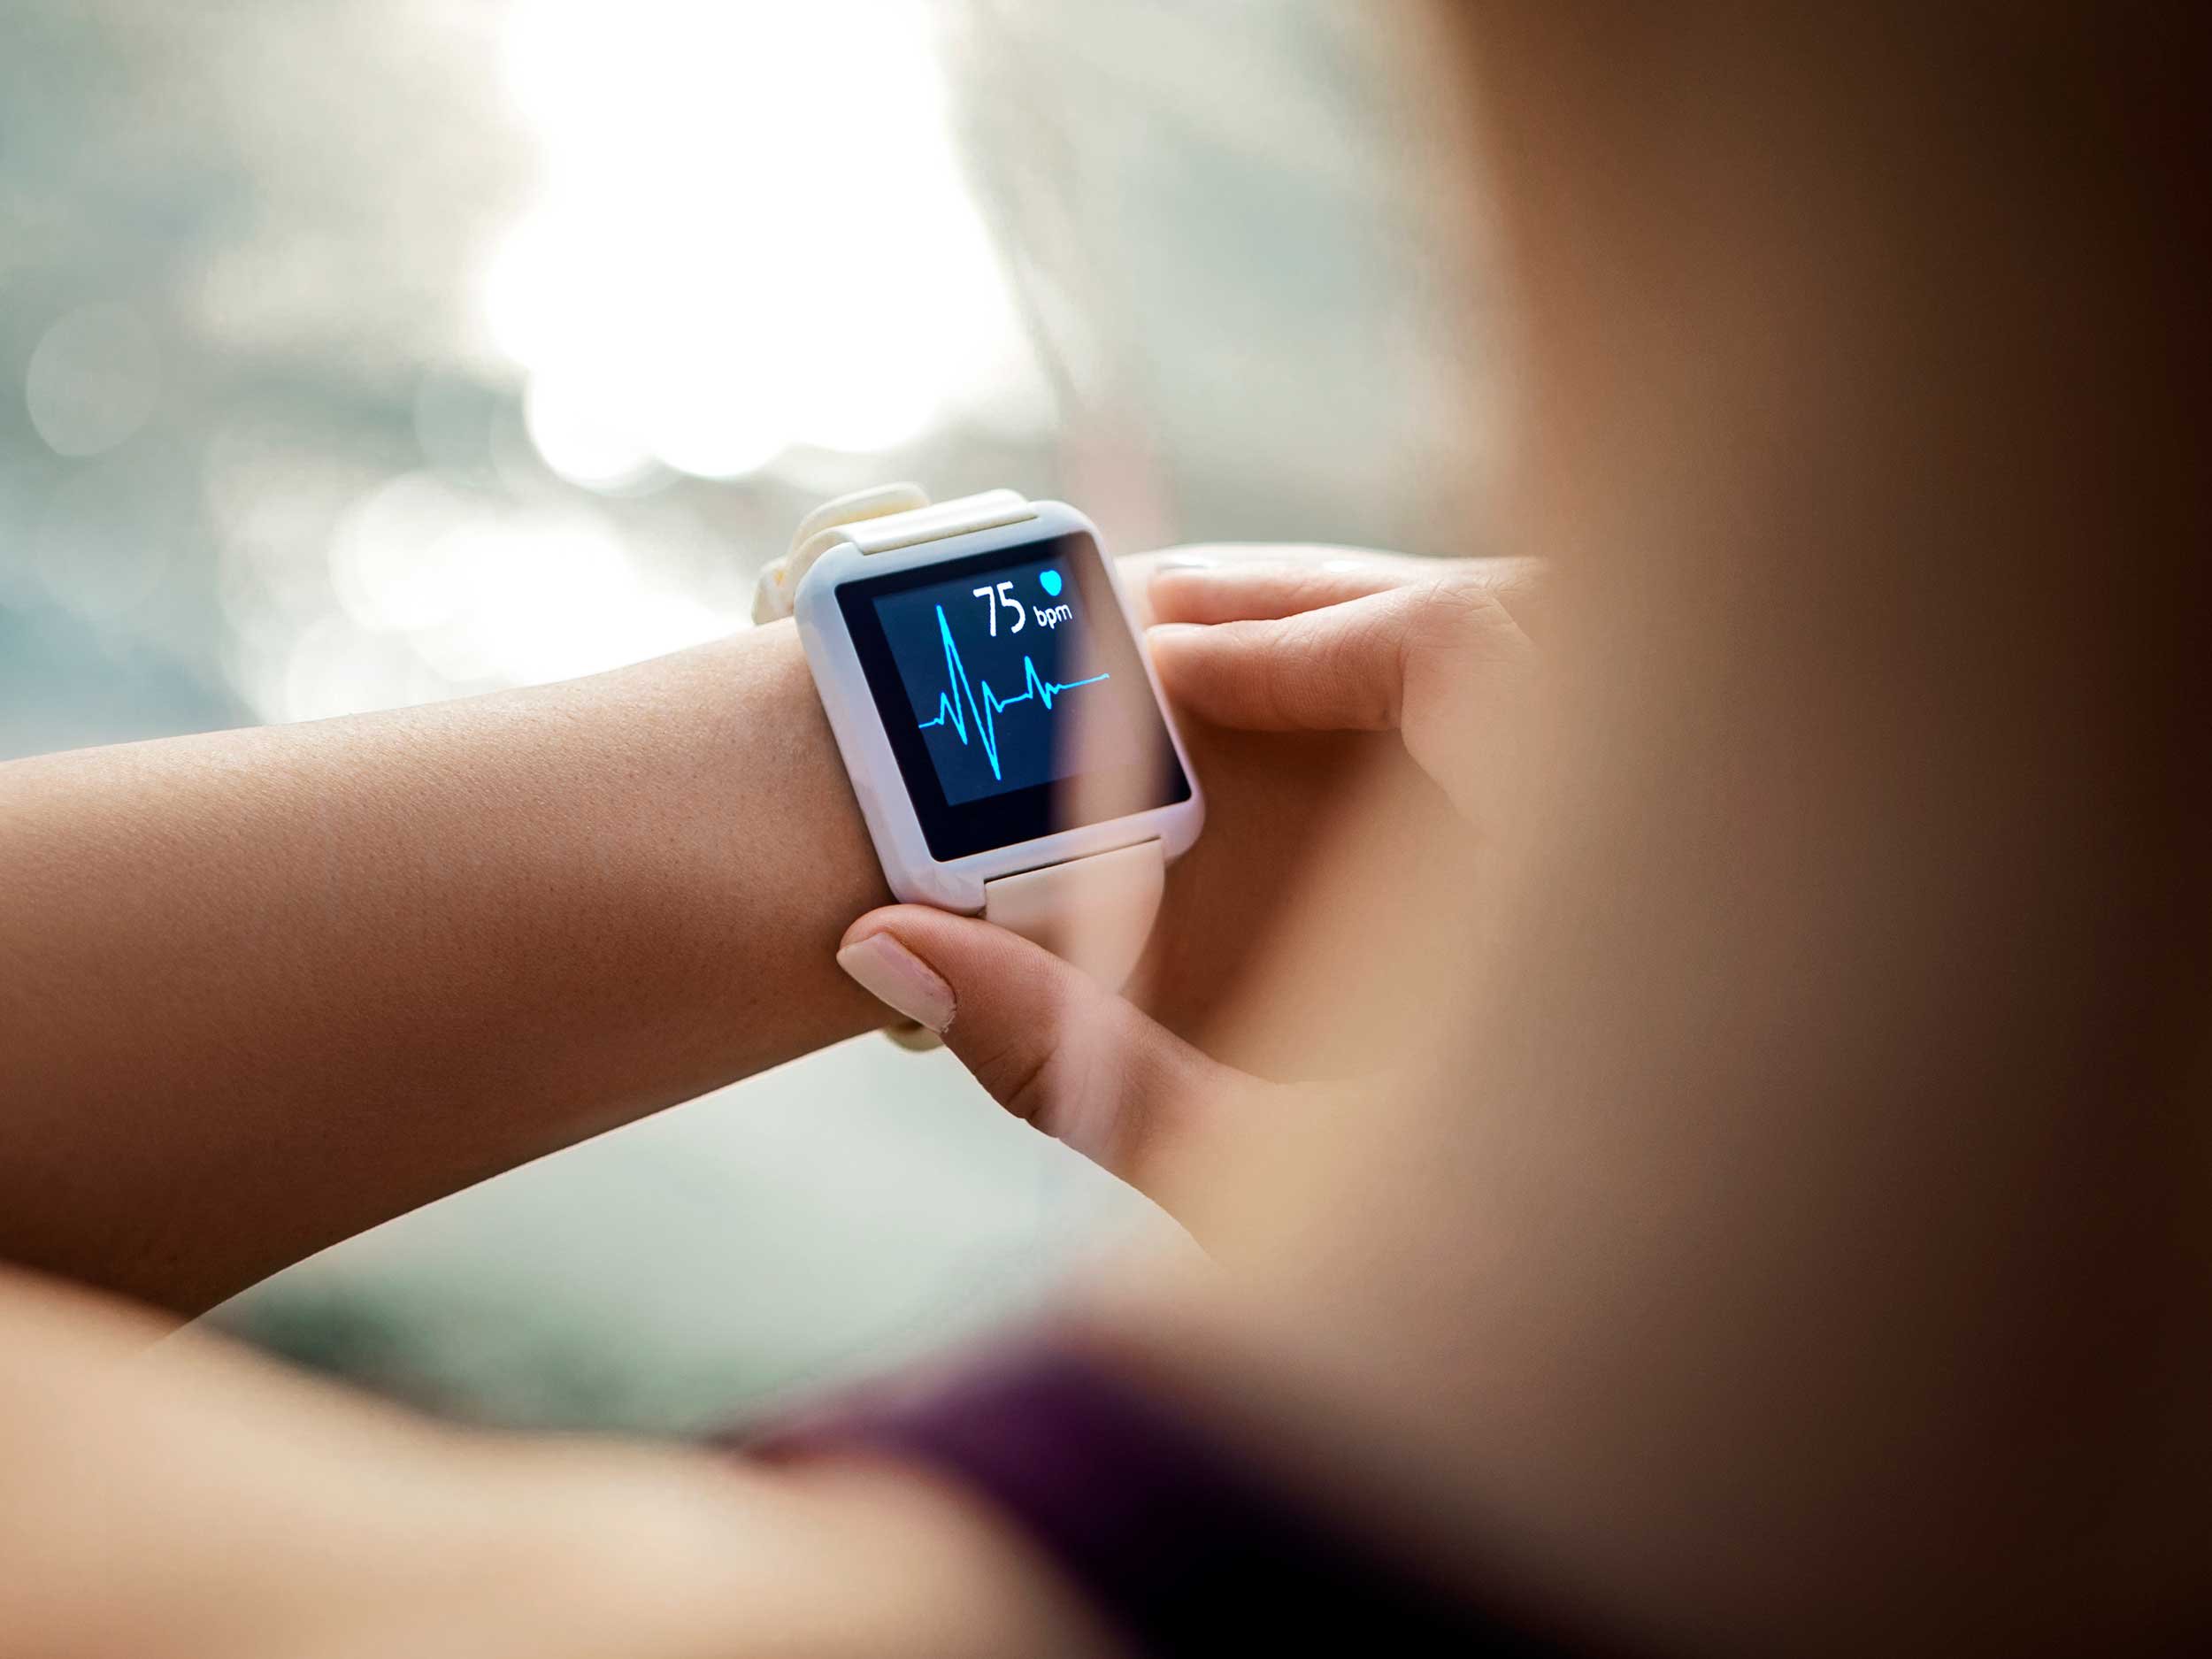 Wearables for Women, Smartwatches for Women